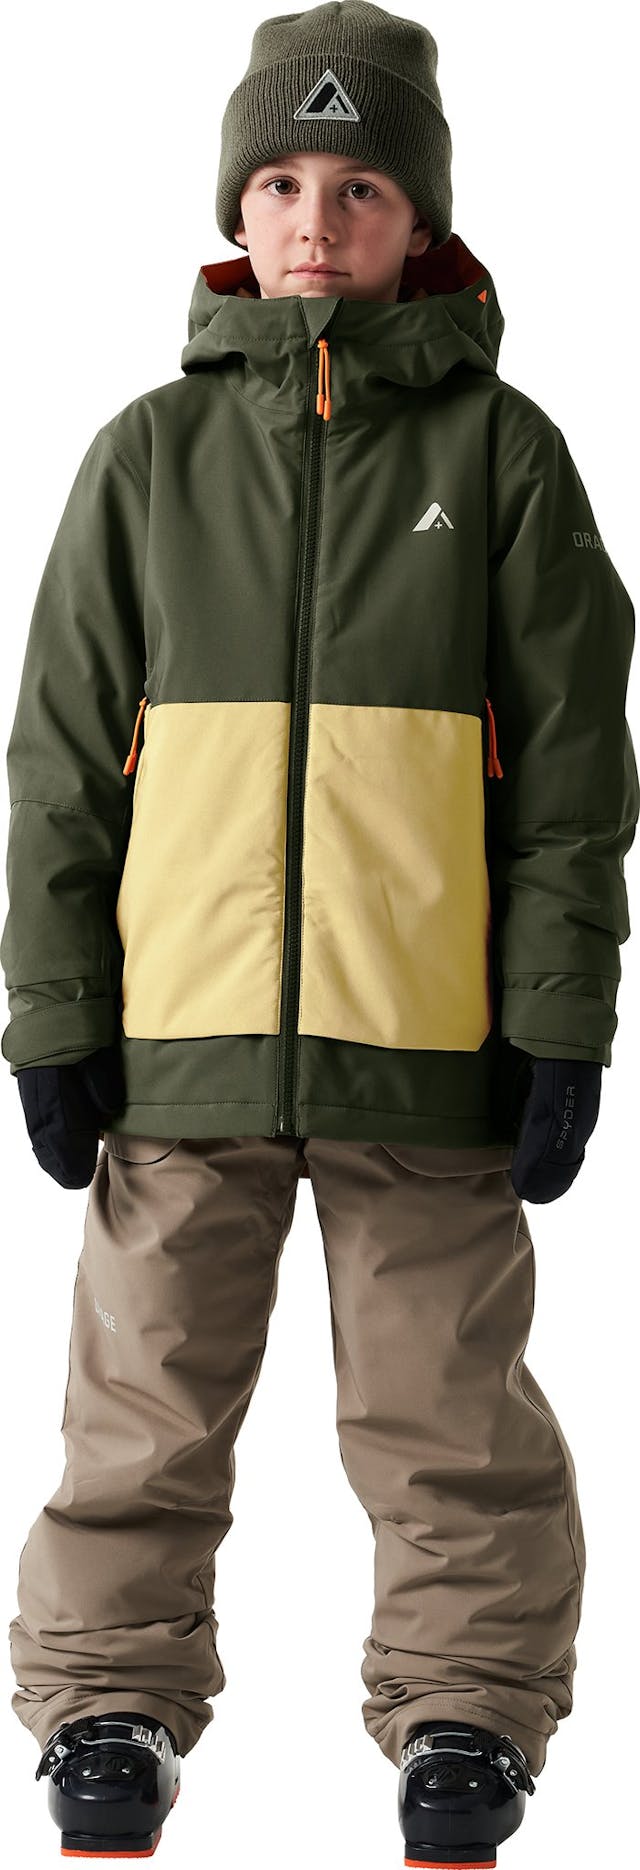 Product image for Slope Insulated Jacket - Boys